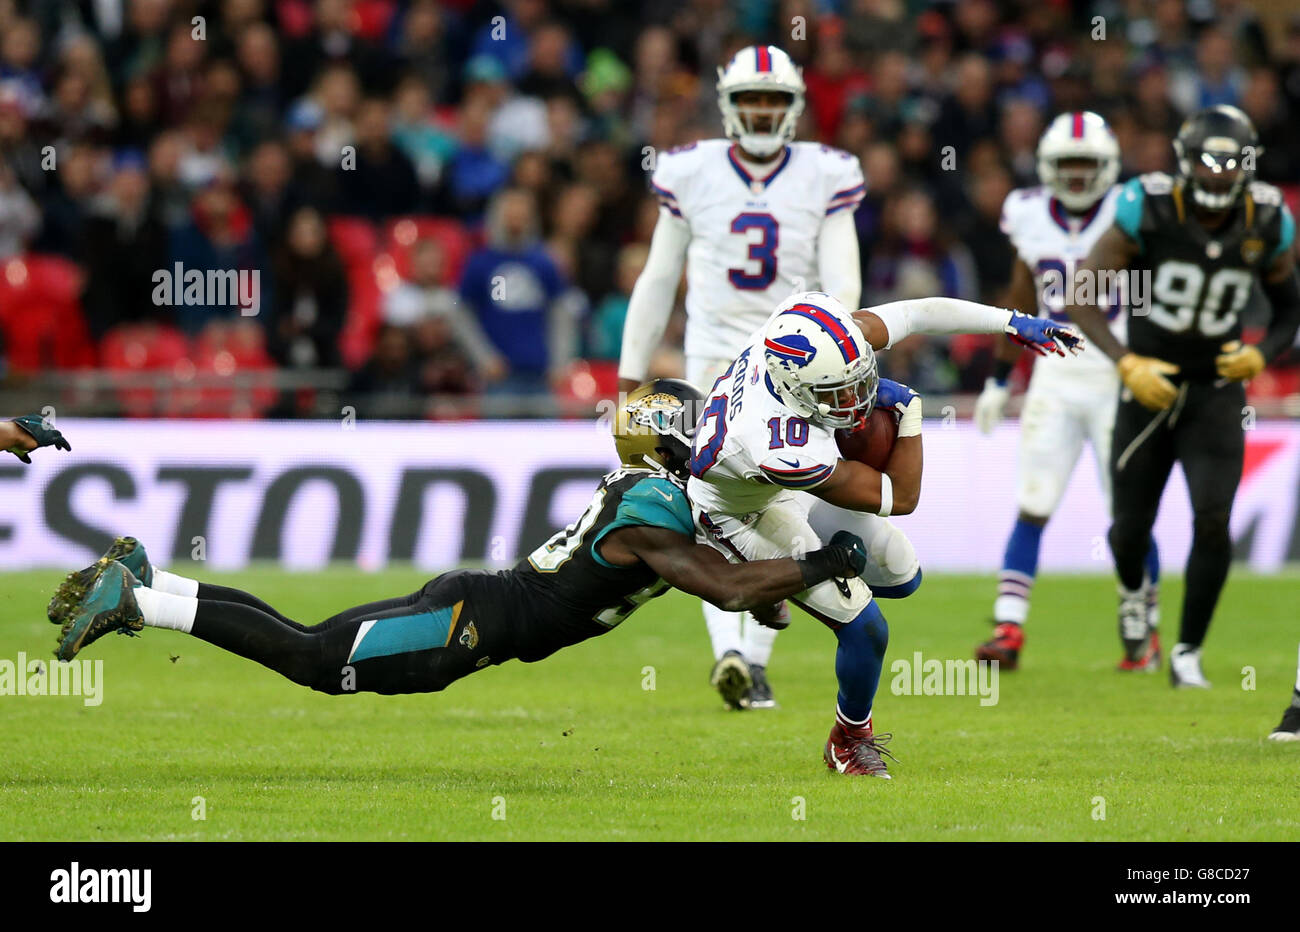 Buffalo Bills' Robert Woods (right) is tackled by Jacksonville Jaguars' Telvin Smith during the NFL International match at Wembley Stadium, London. Stock Photo